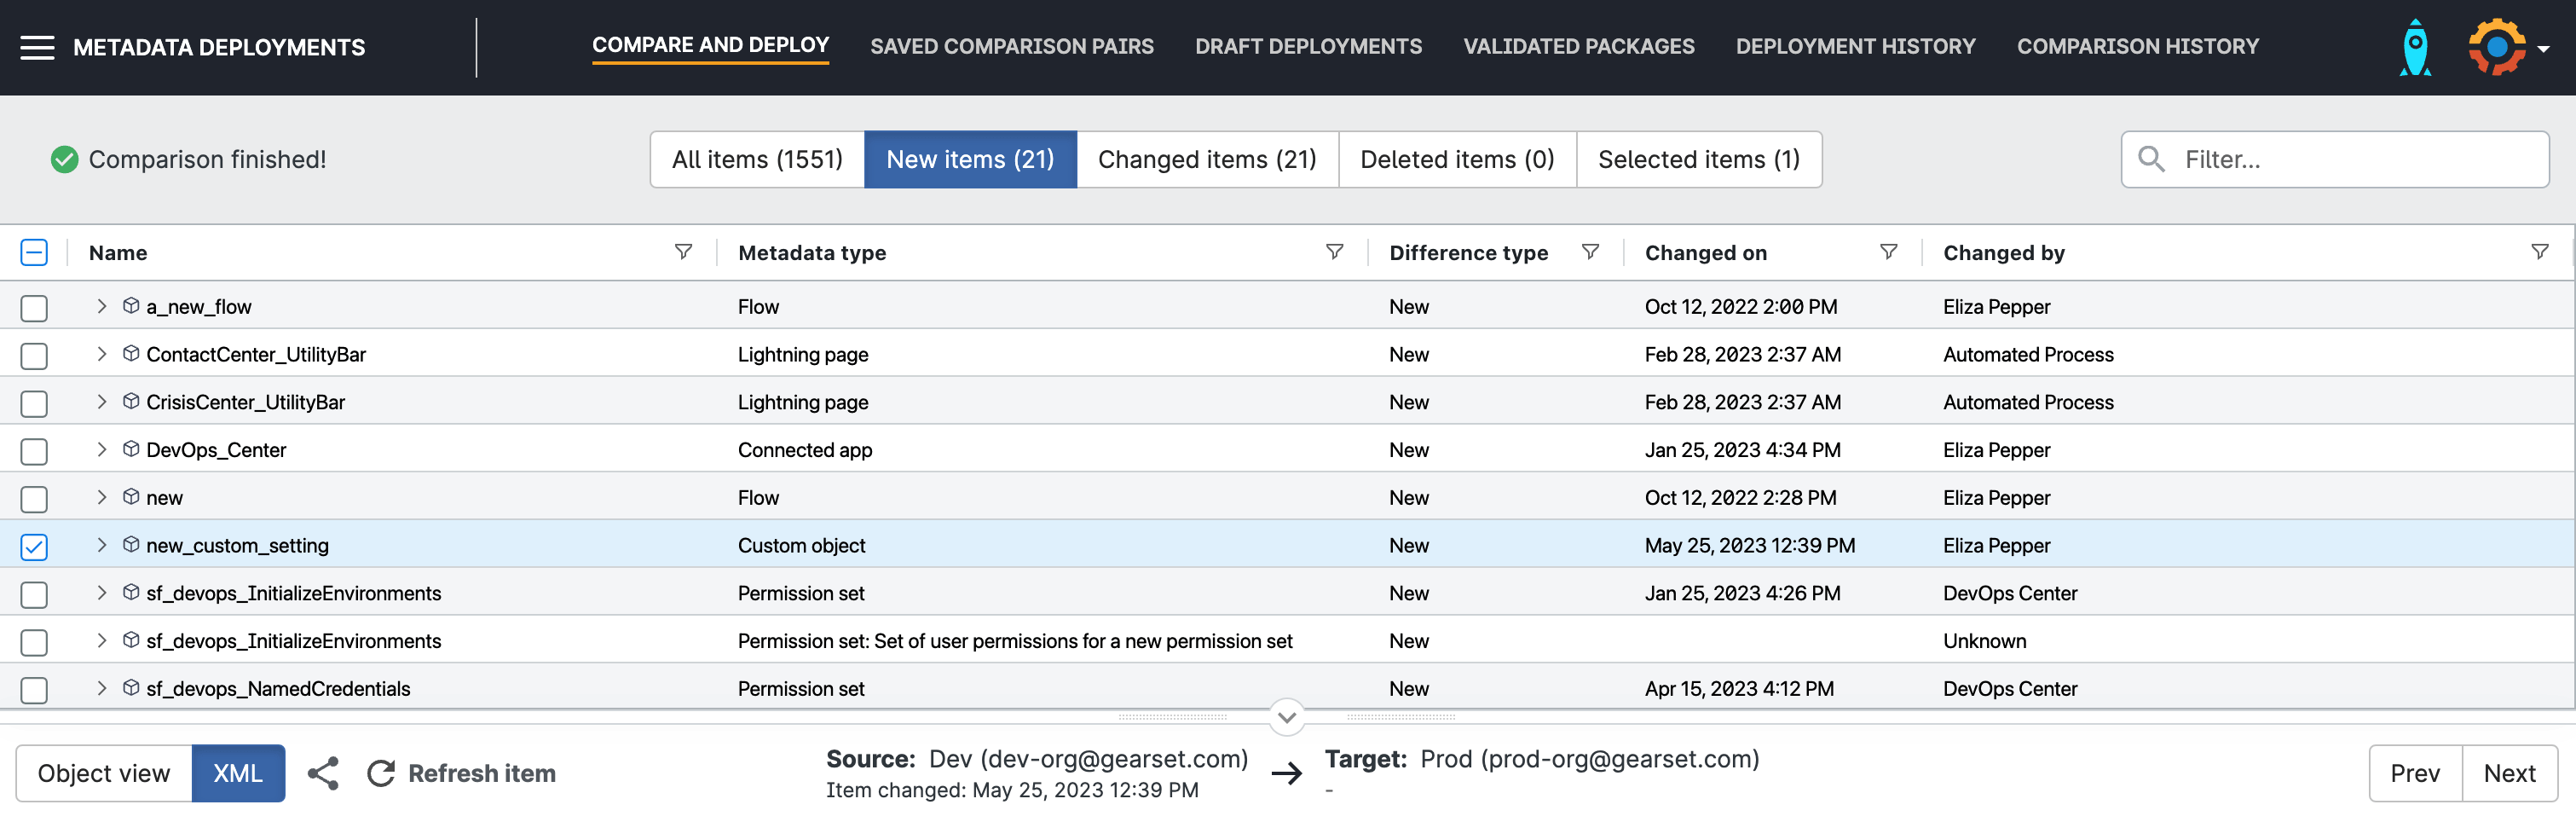 Selecting your new custom setting to deploy